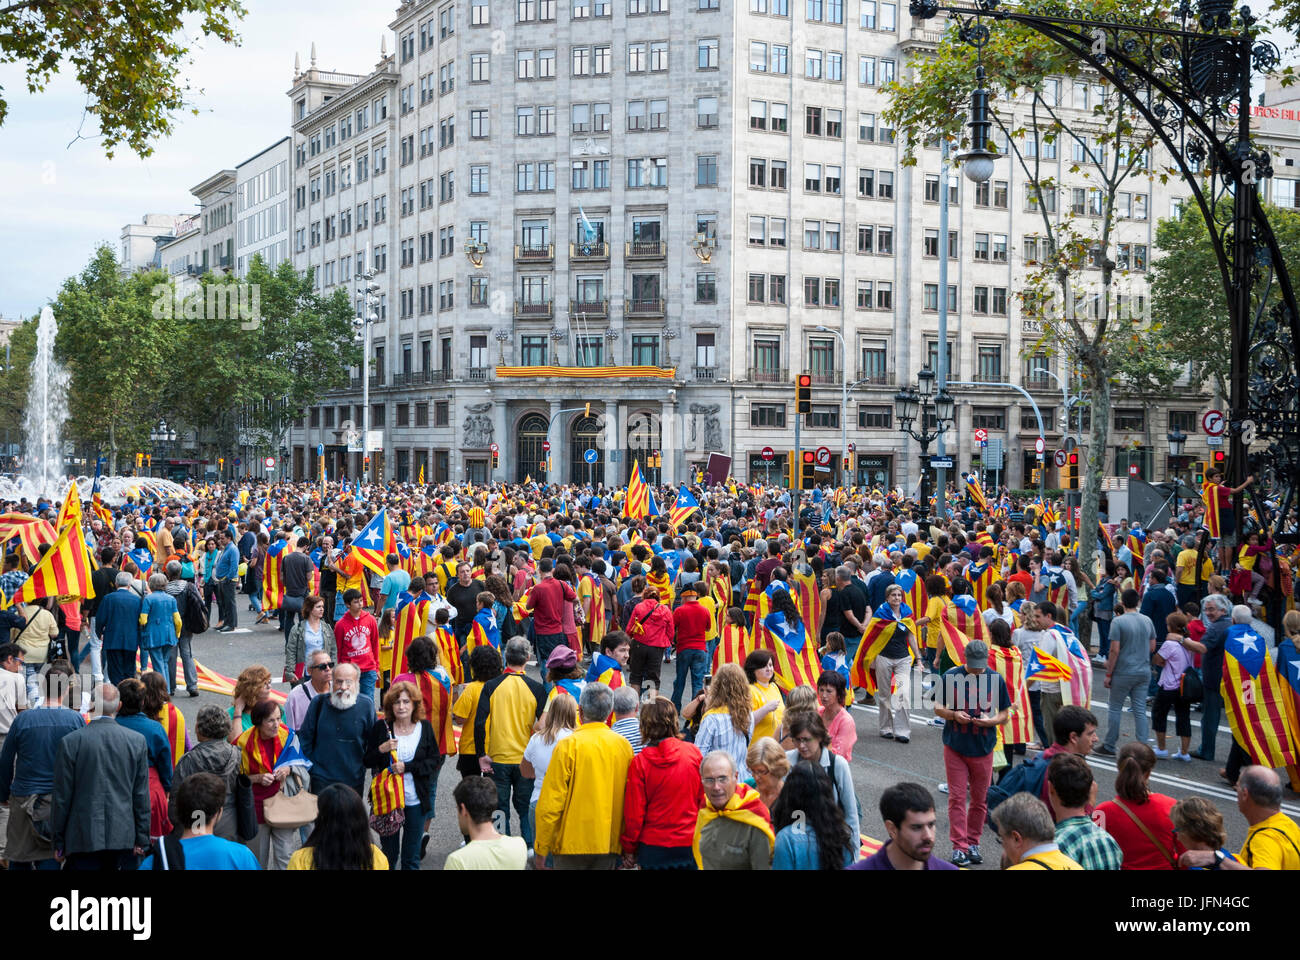 BARCELONA, SPAIN - SEPTEMBER 11: People joining the human chain 'Catalan Way' crossing all Catalonia, silent demonstration for independent Catalonia i Stock Photo